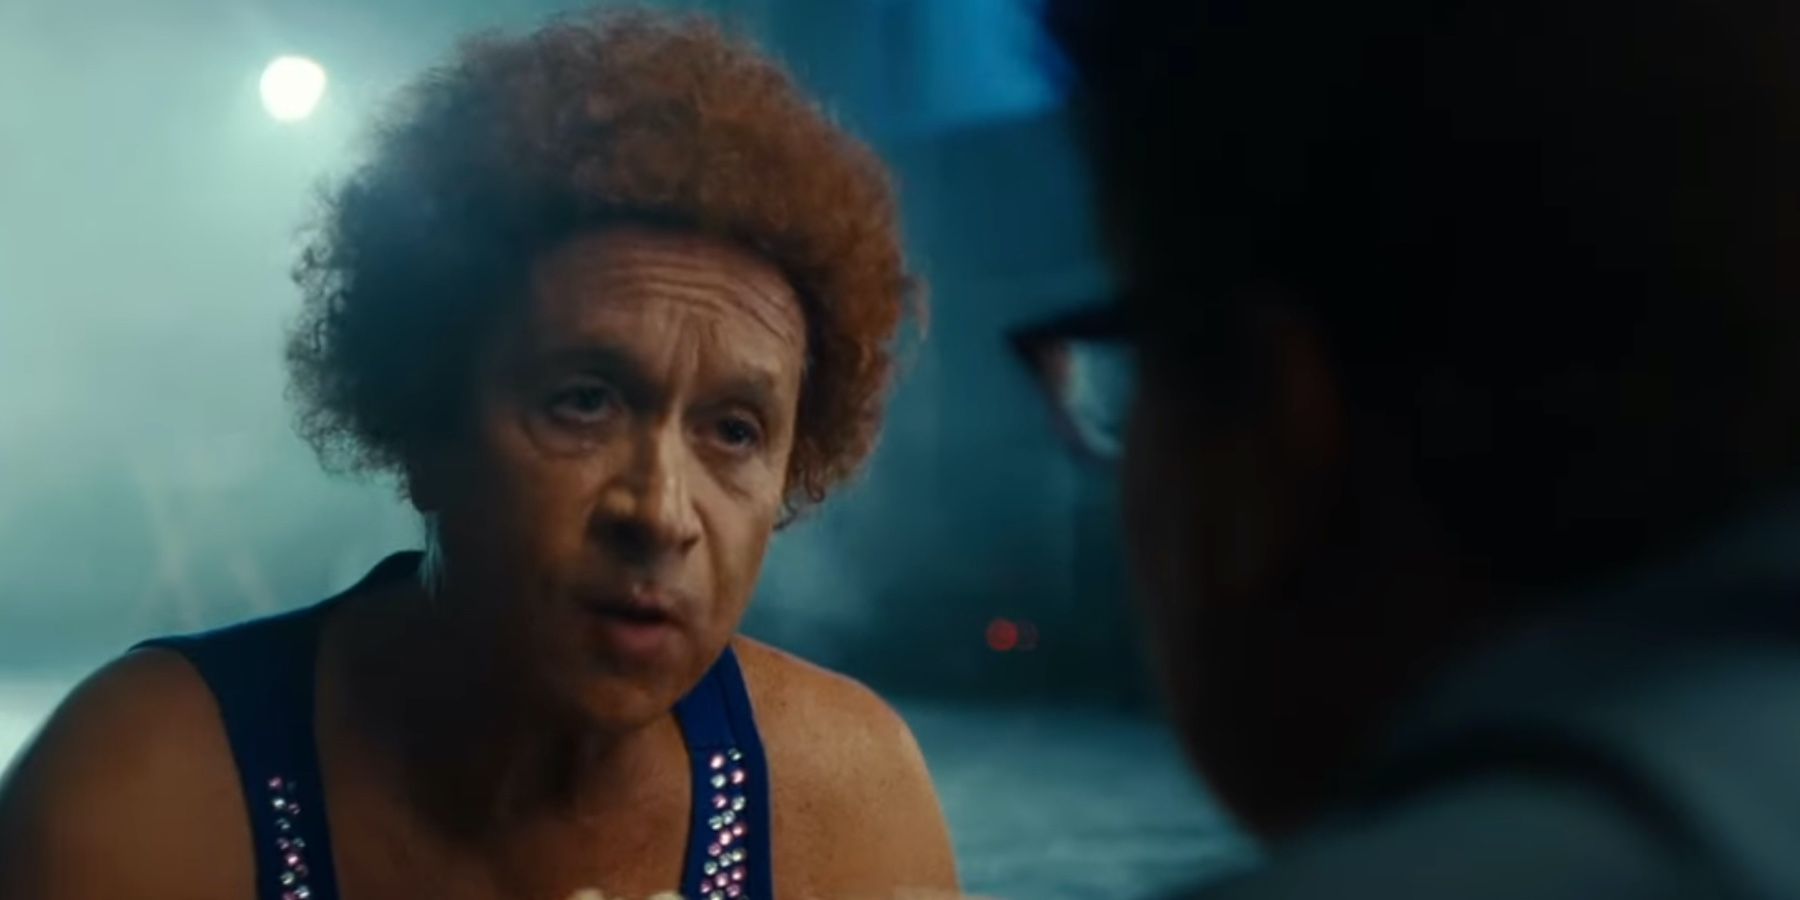 Fitness Guru Richard Simmons Calls Out Pauly Shore Biopic Film For Not